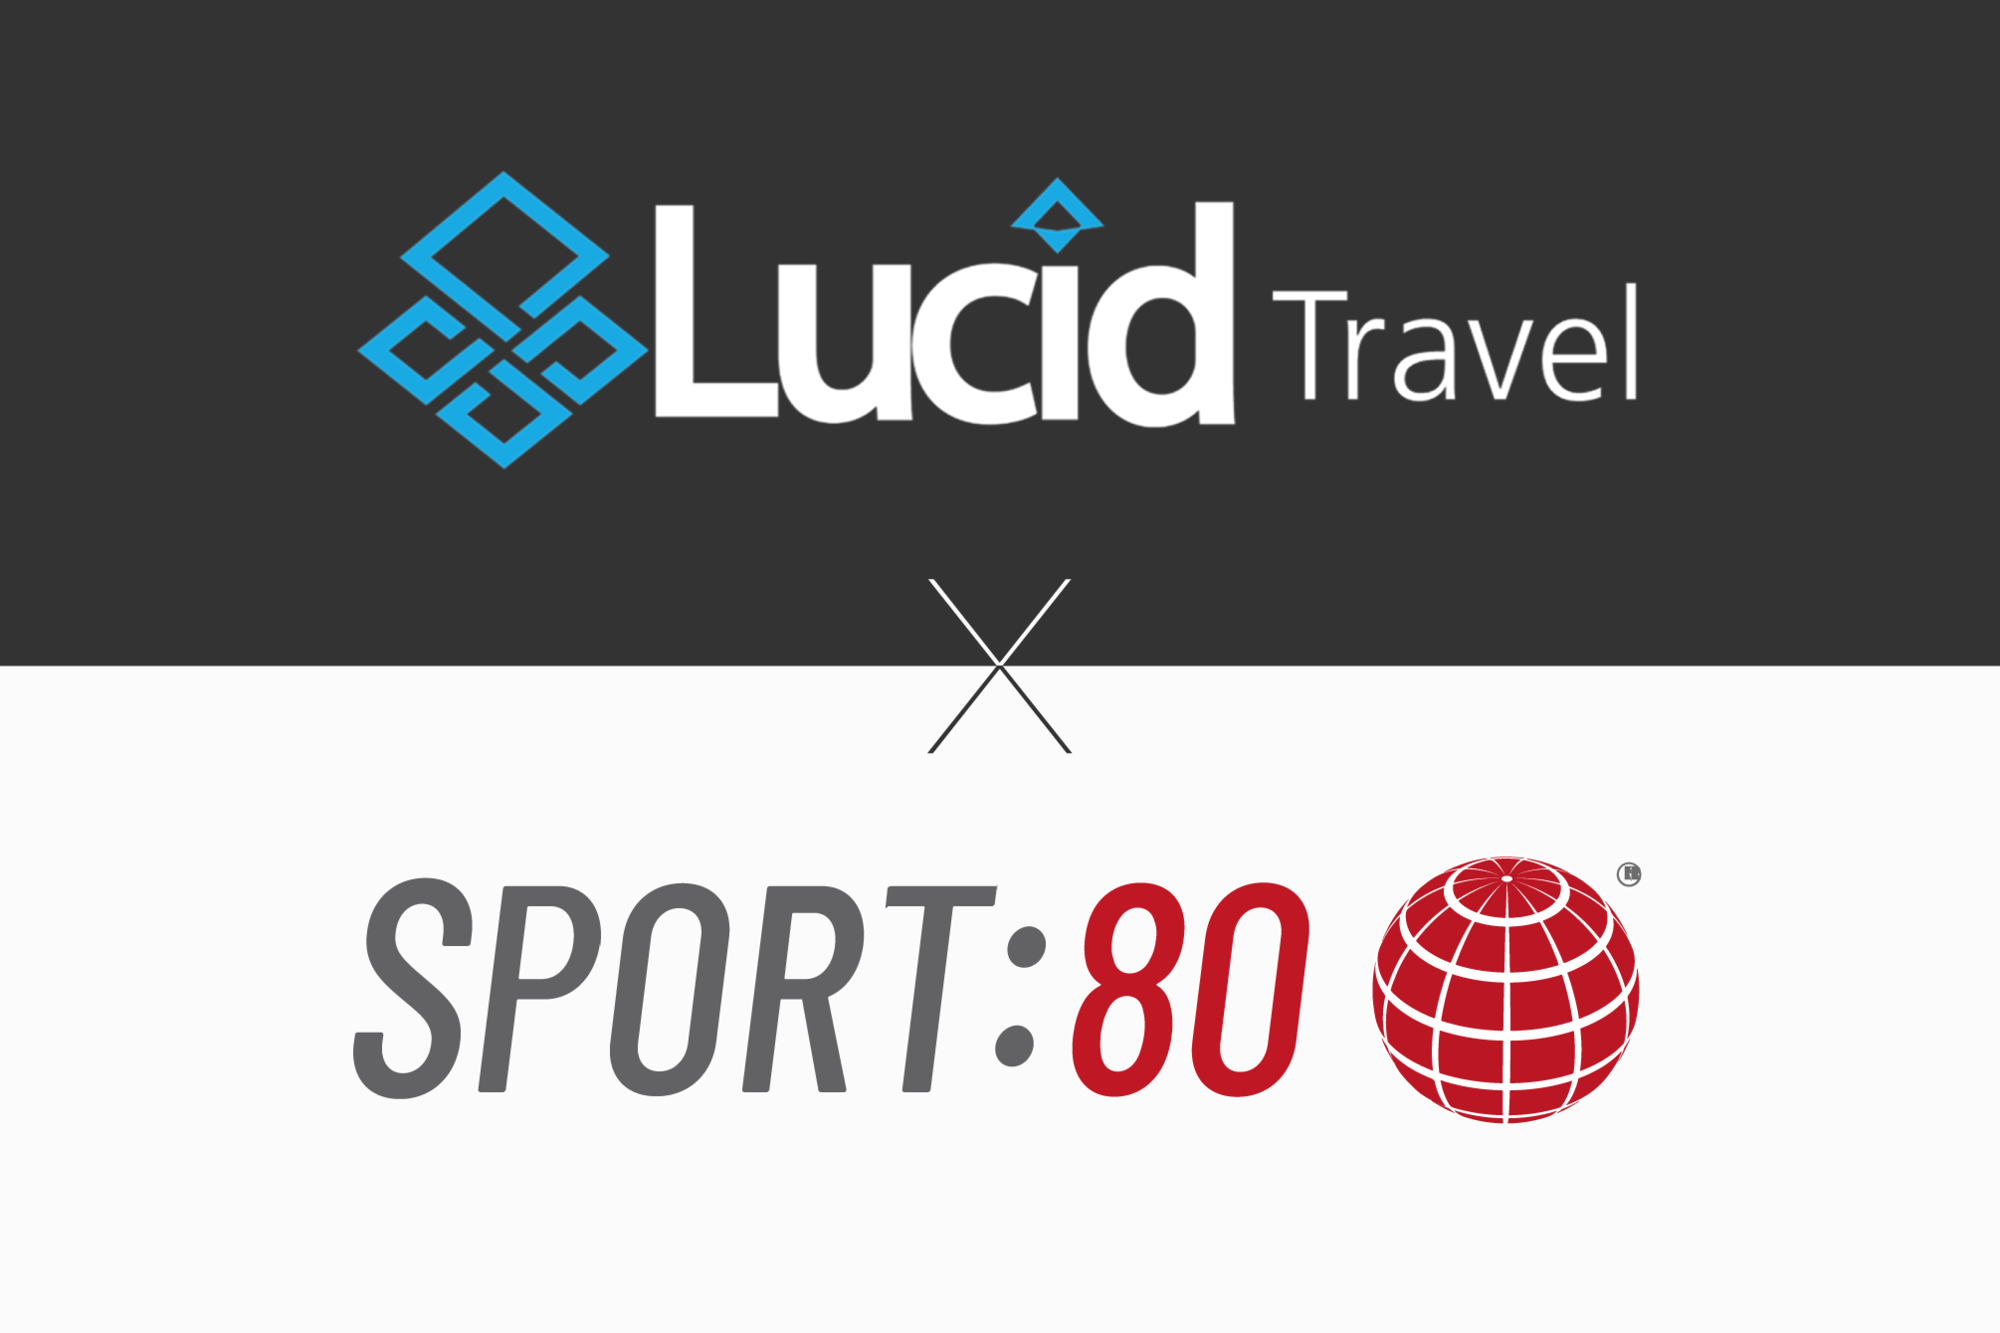 How NGBs can generate revenue and make booking accommodation a breeze through Sport:80’s partnership with Lucid Travel